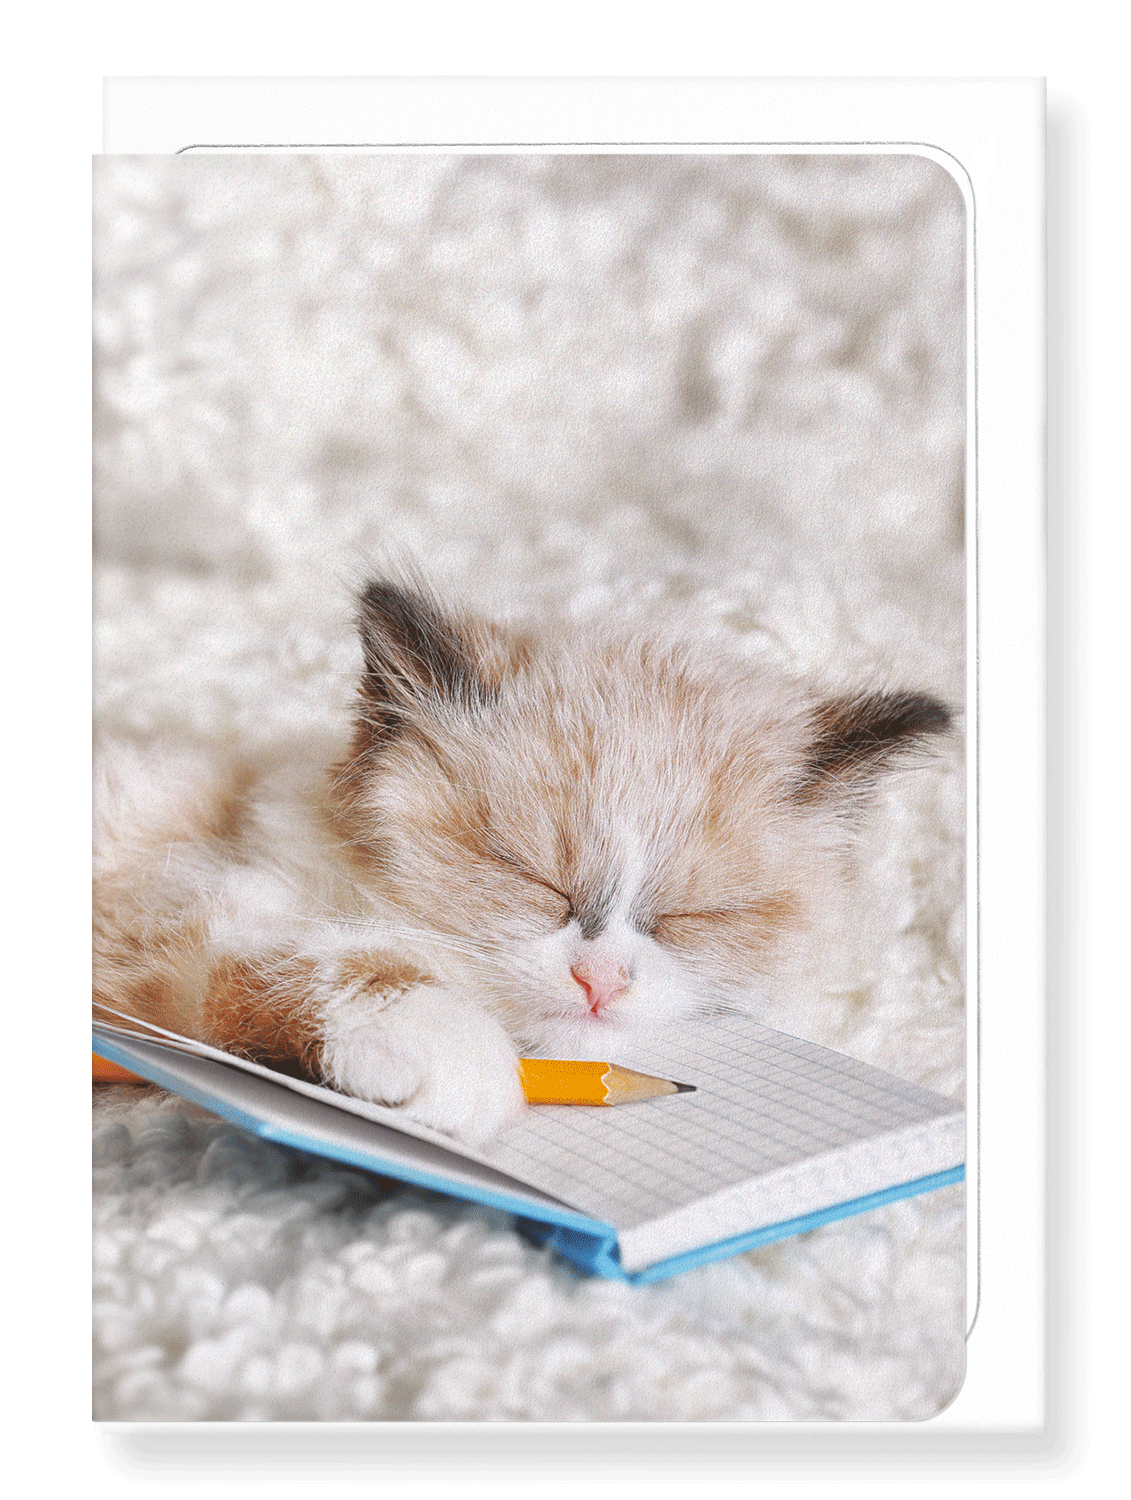 Ezen Designs - Kitten and notebook - Greeting Card - Front